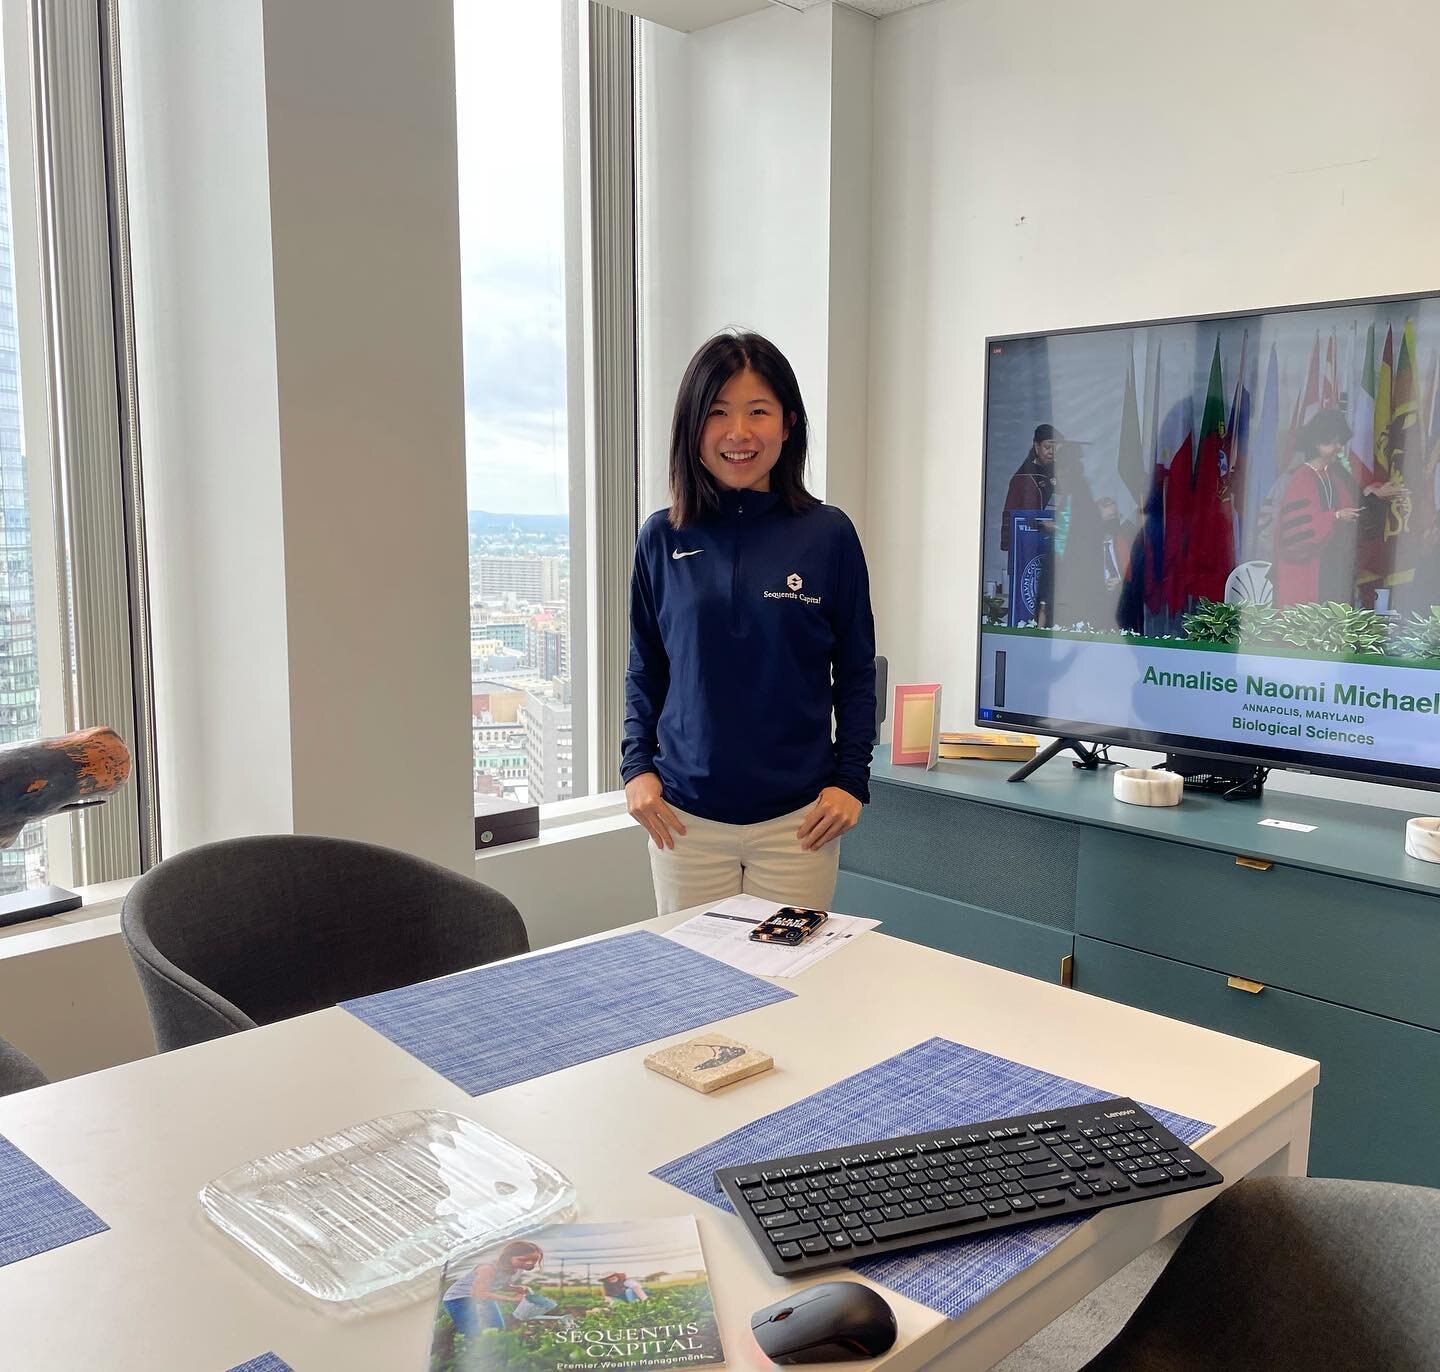 Sequentis Capital Senior Analyst &amp; Wellesley College Alum, Cissy Hao, watching the live 2021 Wellesley commencement today. As Mark Twain said &ldquo;the two most important days in your life are the day you are born, and the day you find out why.&